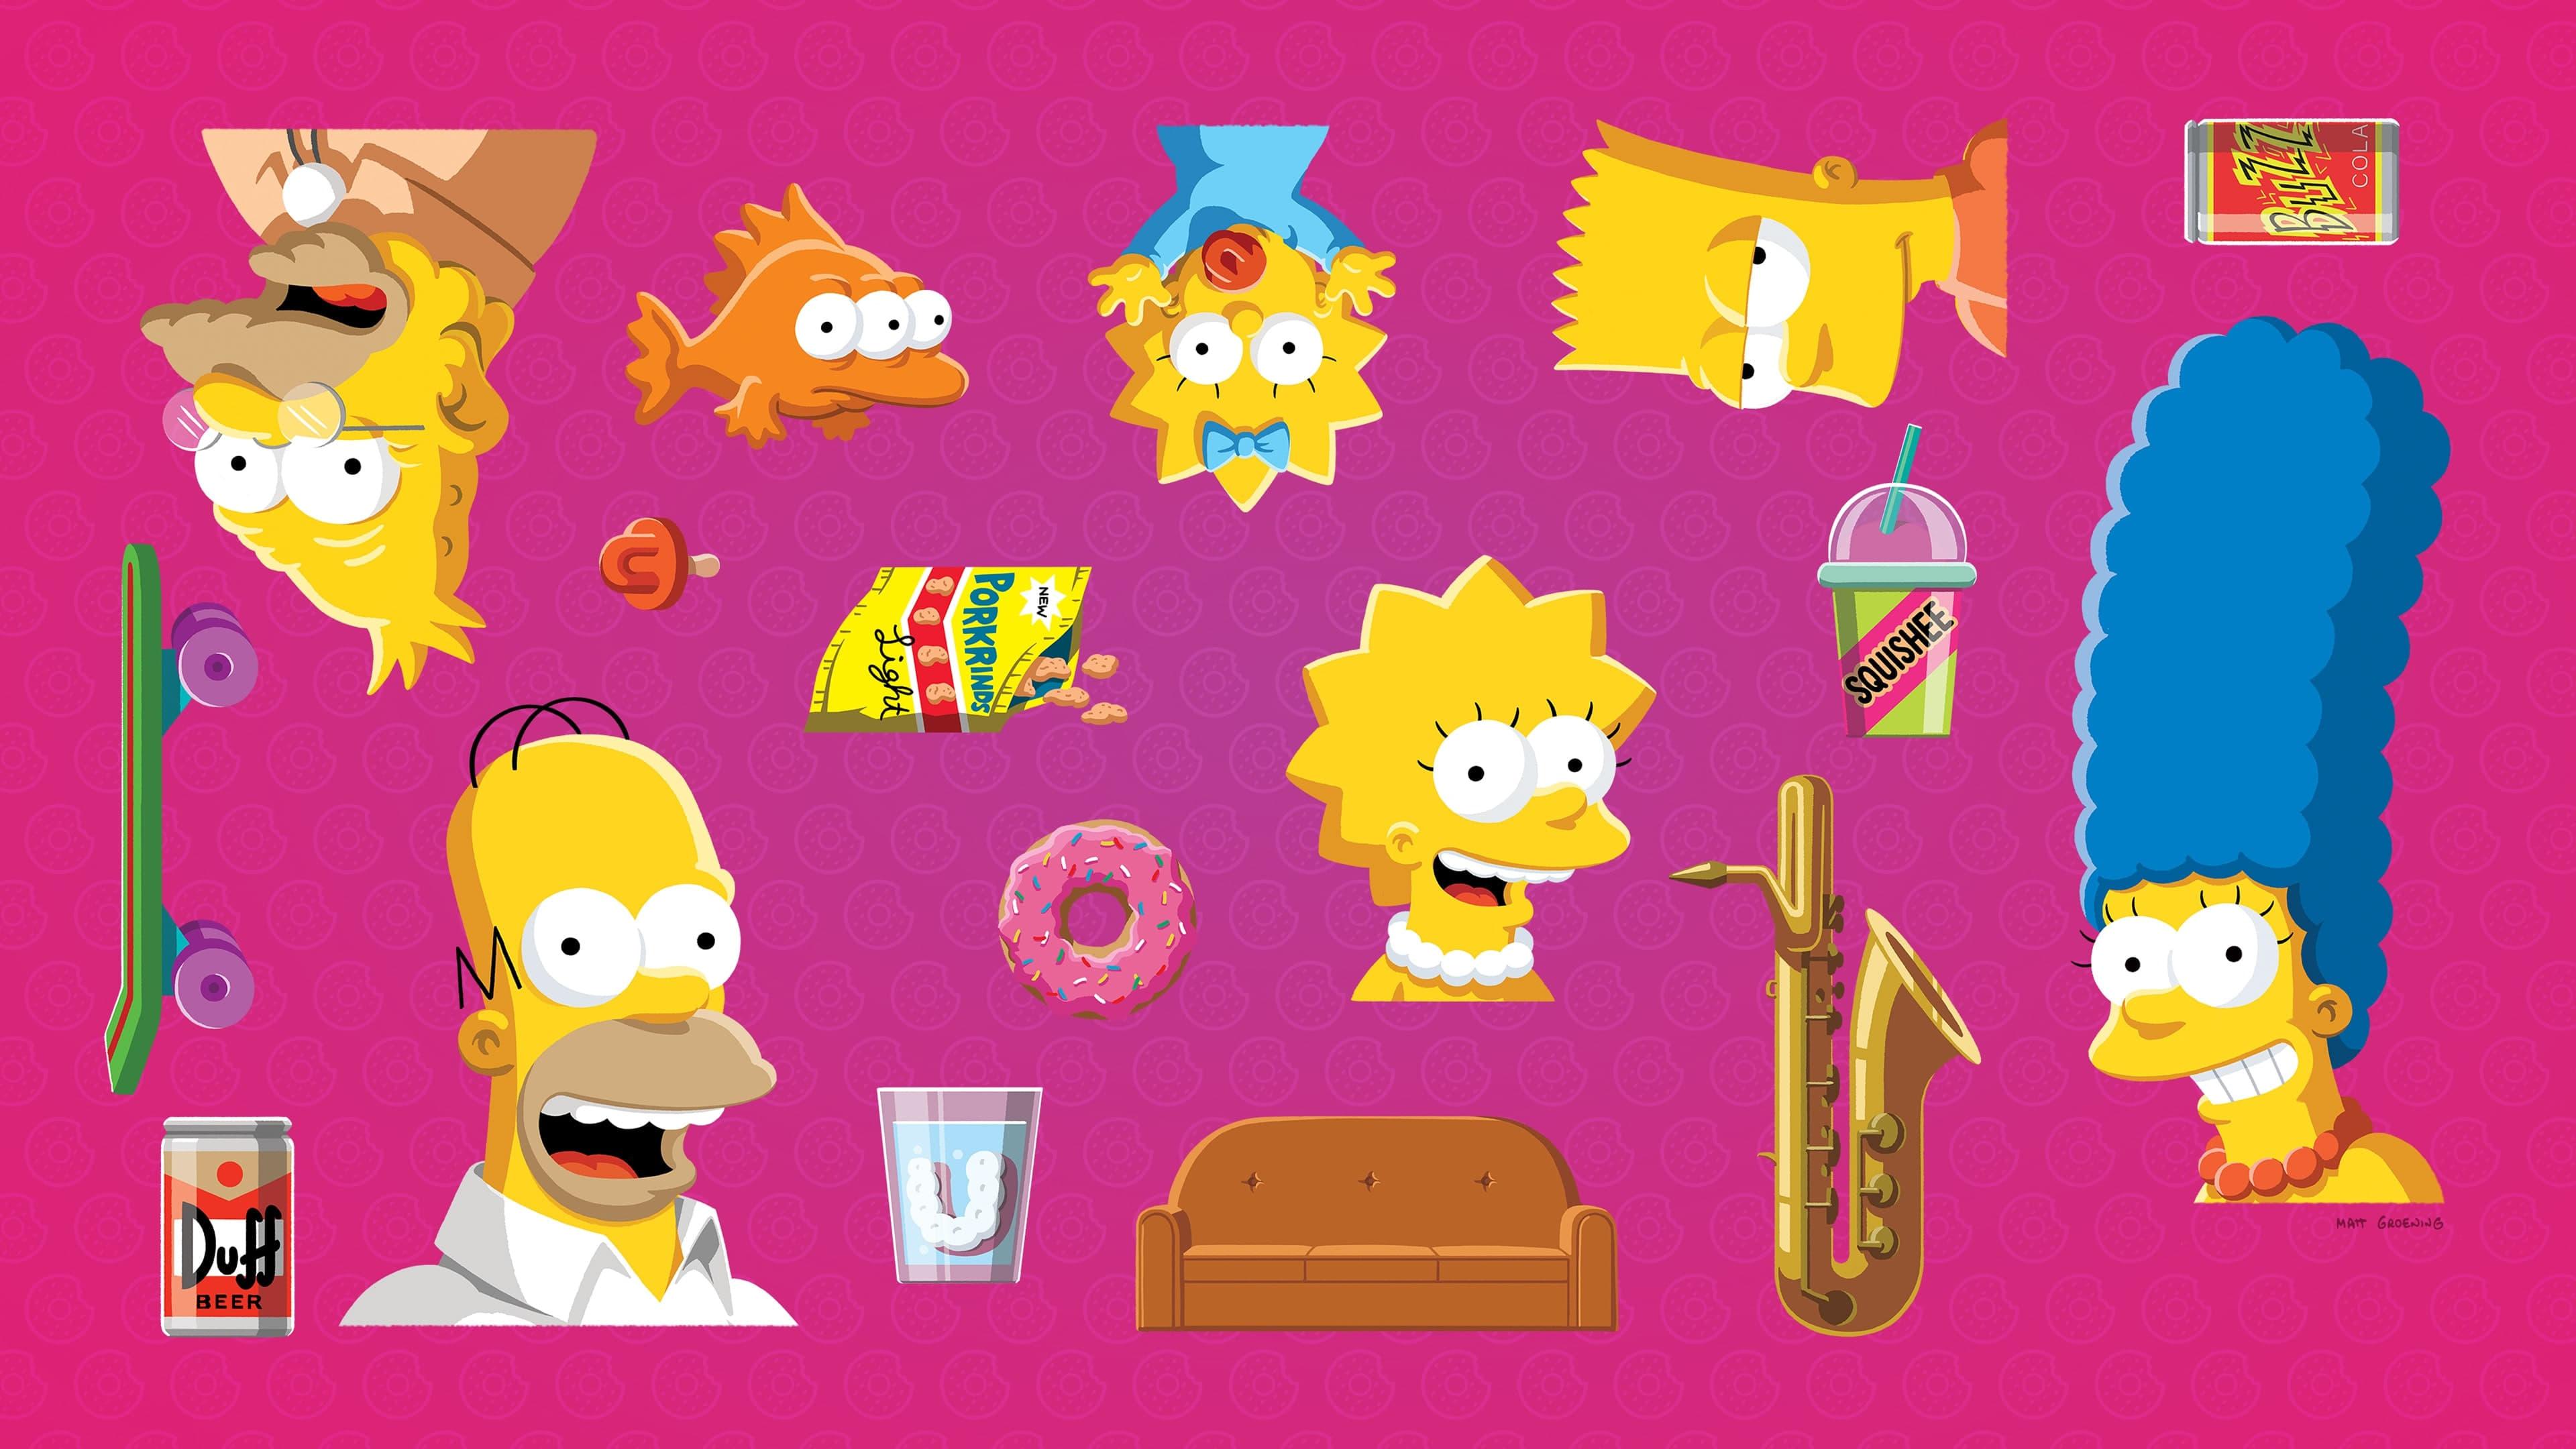 The Simpsons backdrop